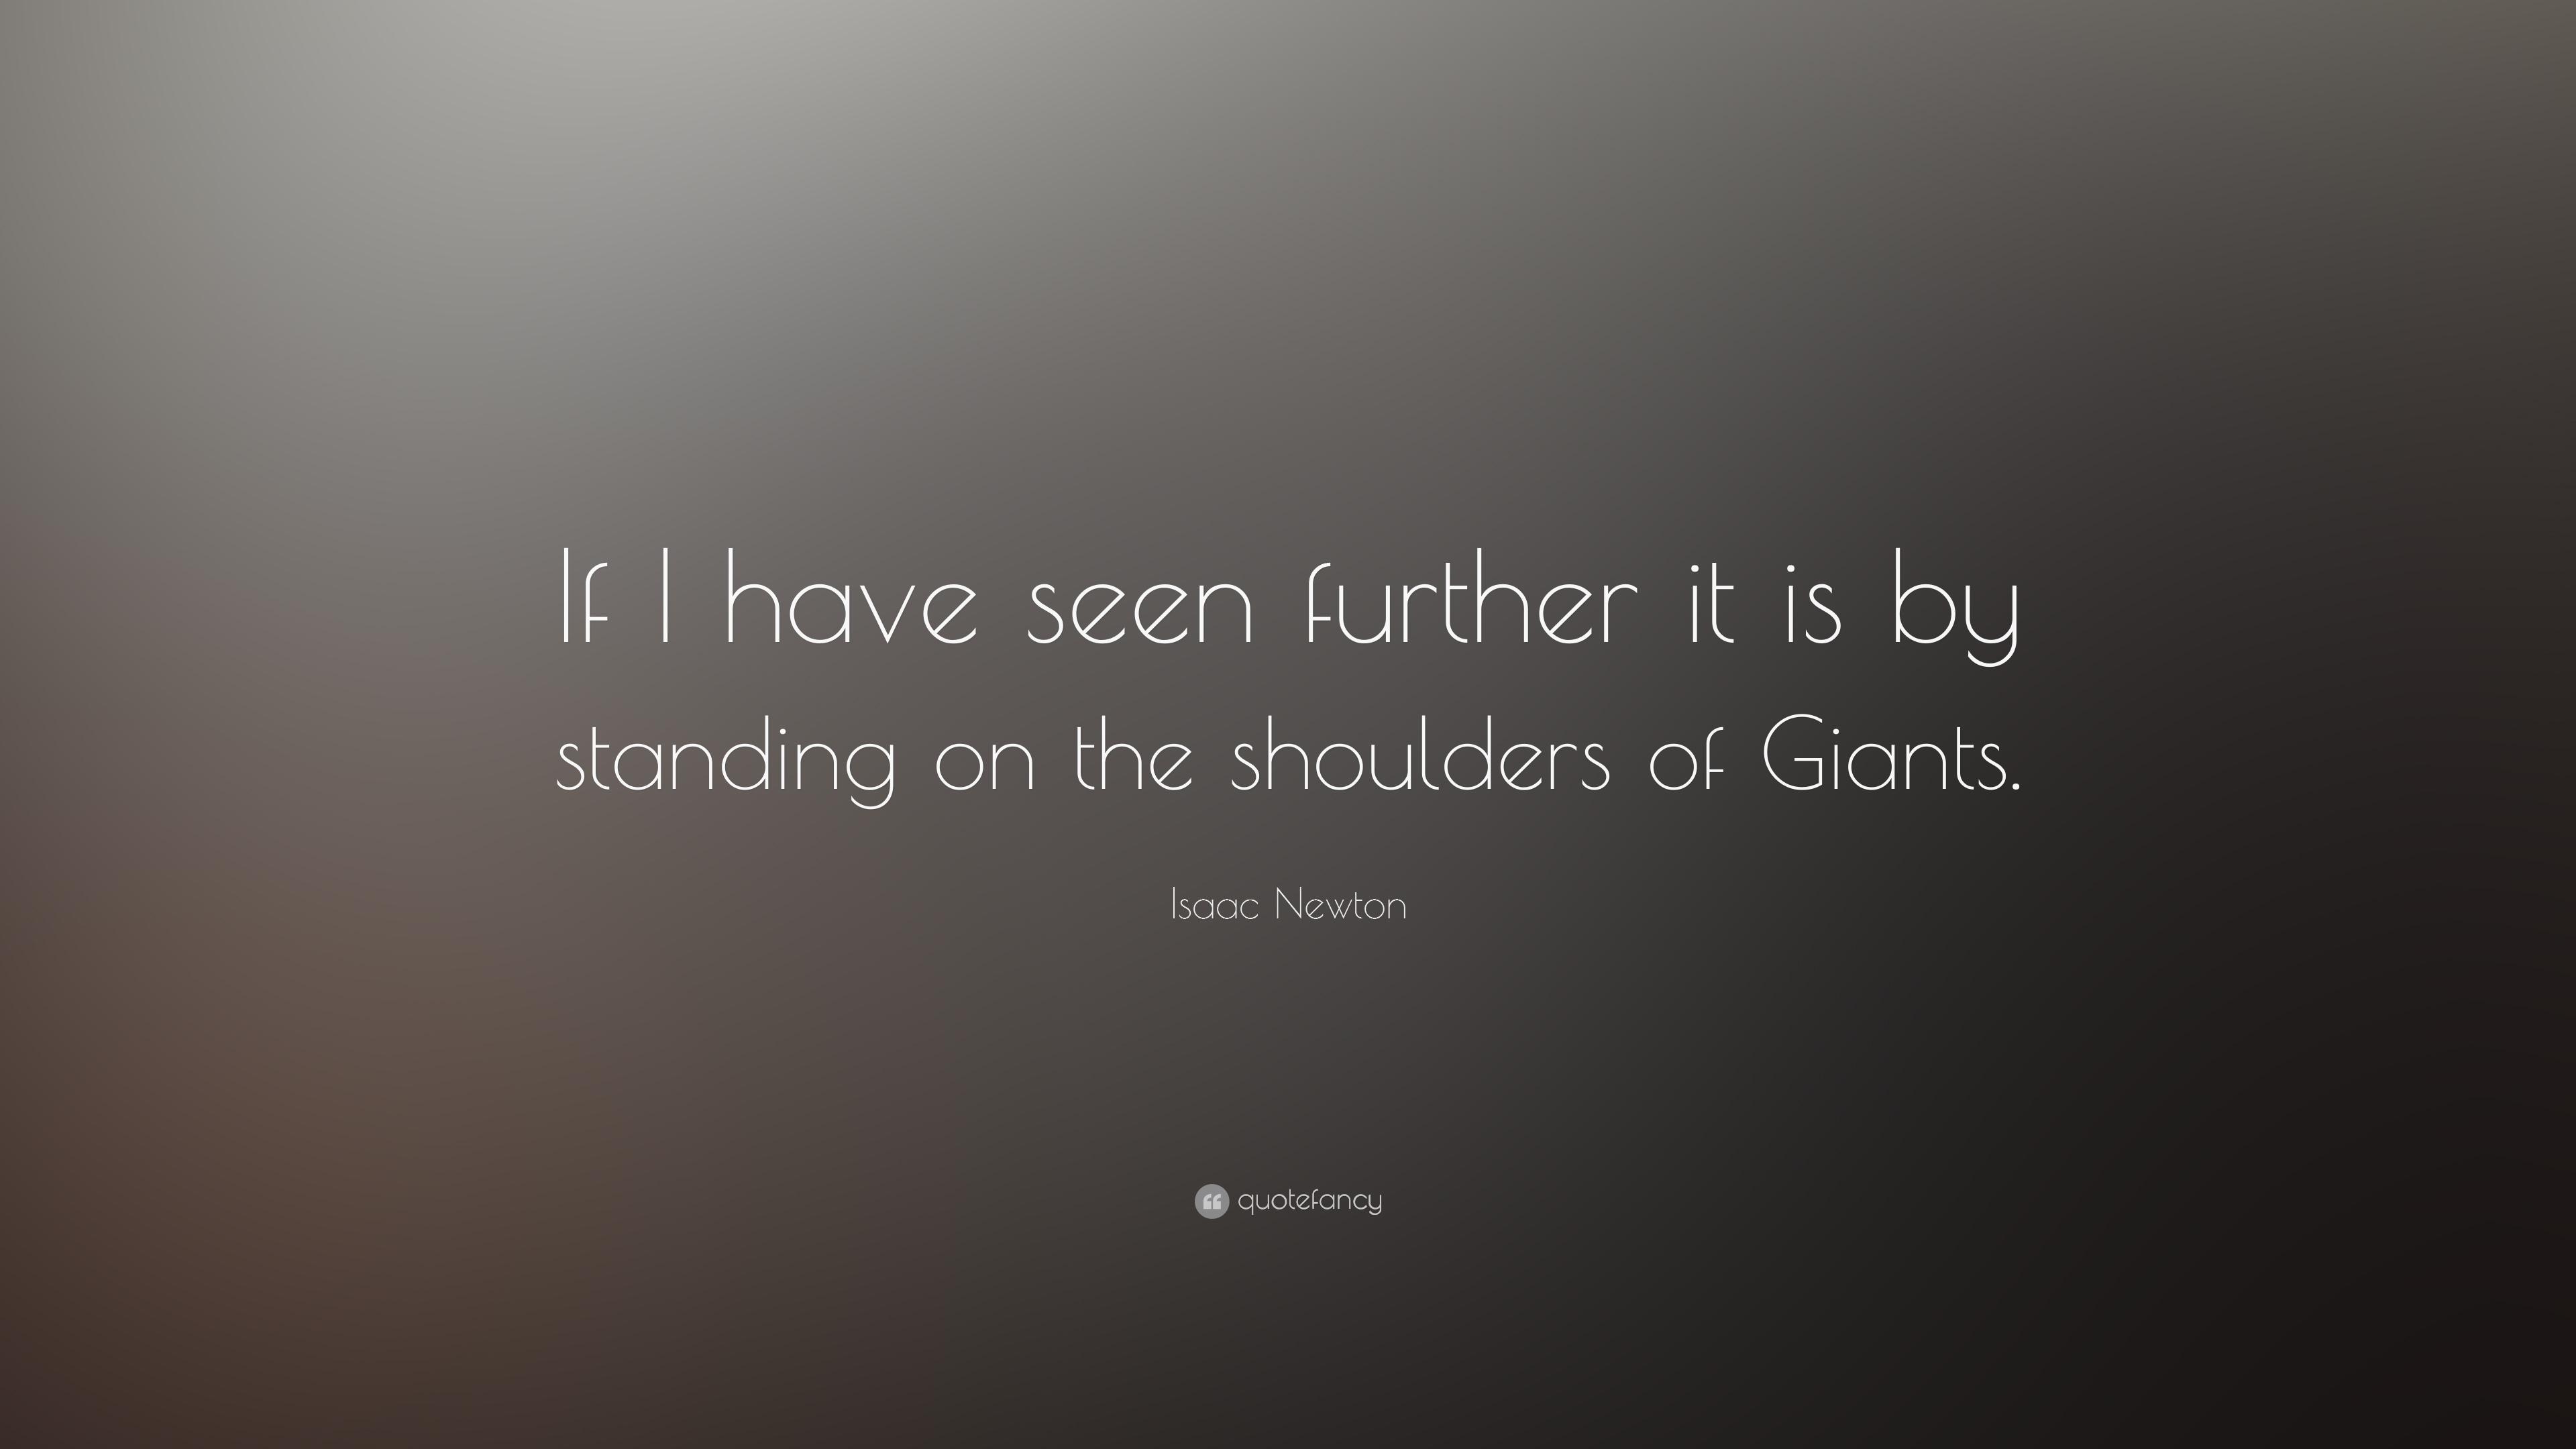 Isaac Newton Quote: “If I have seen further it is